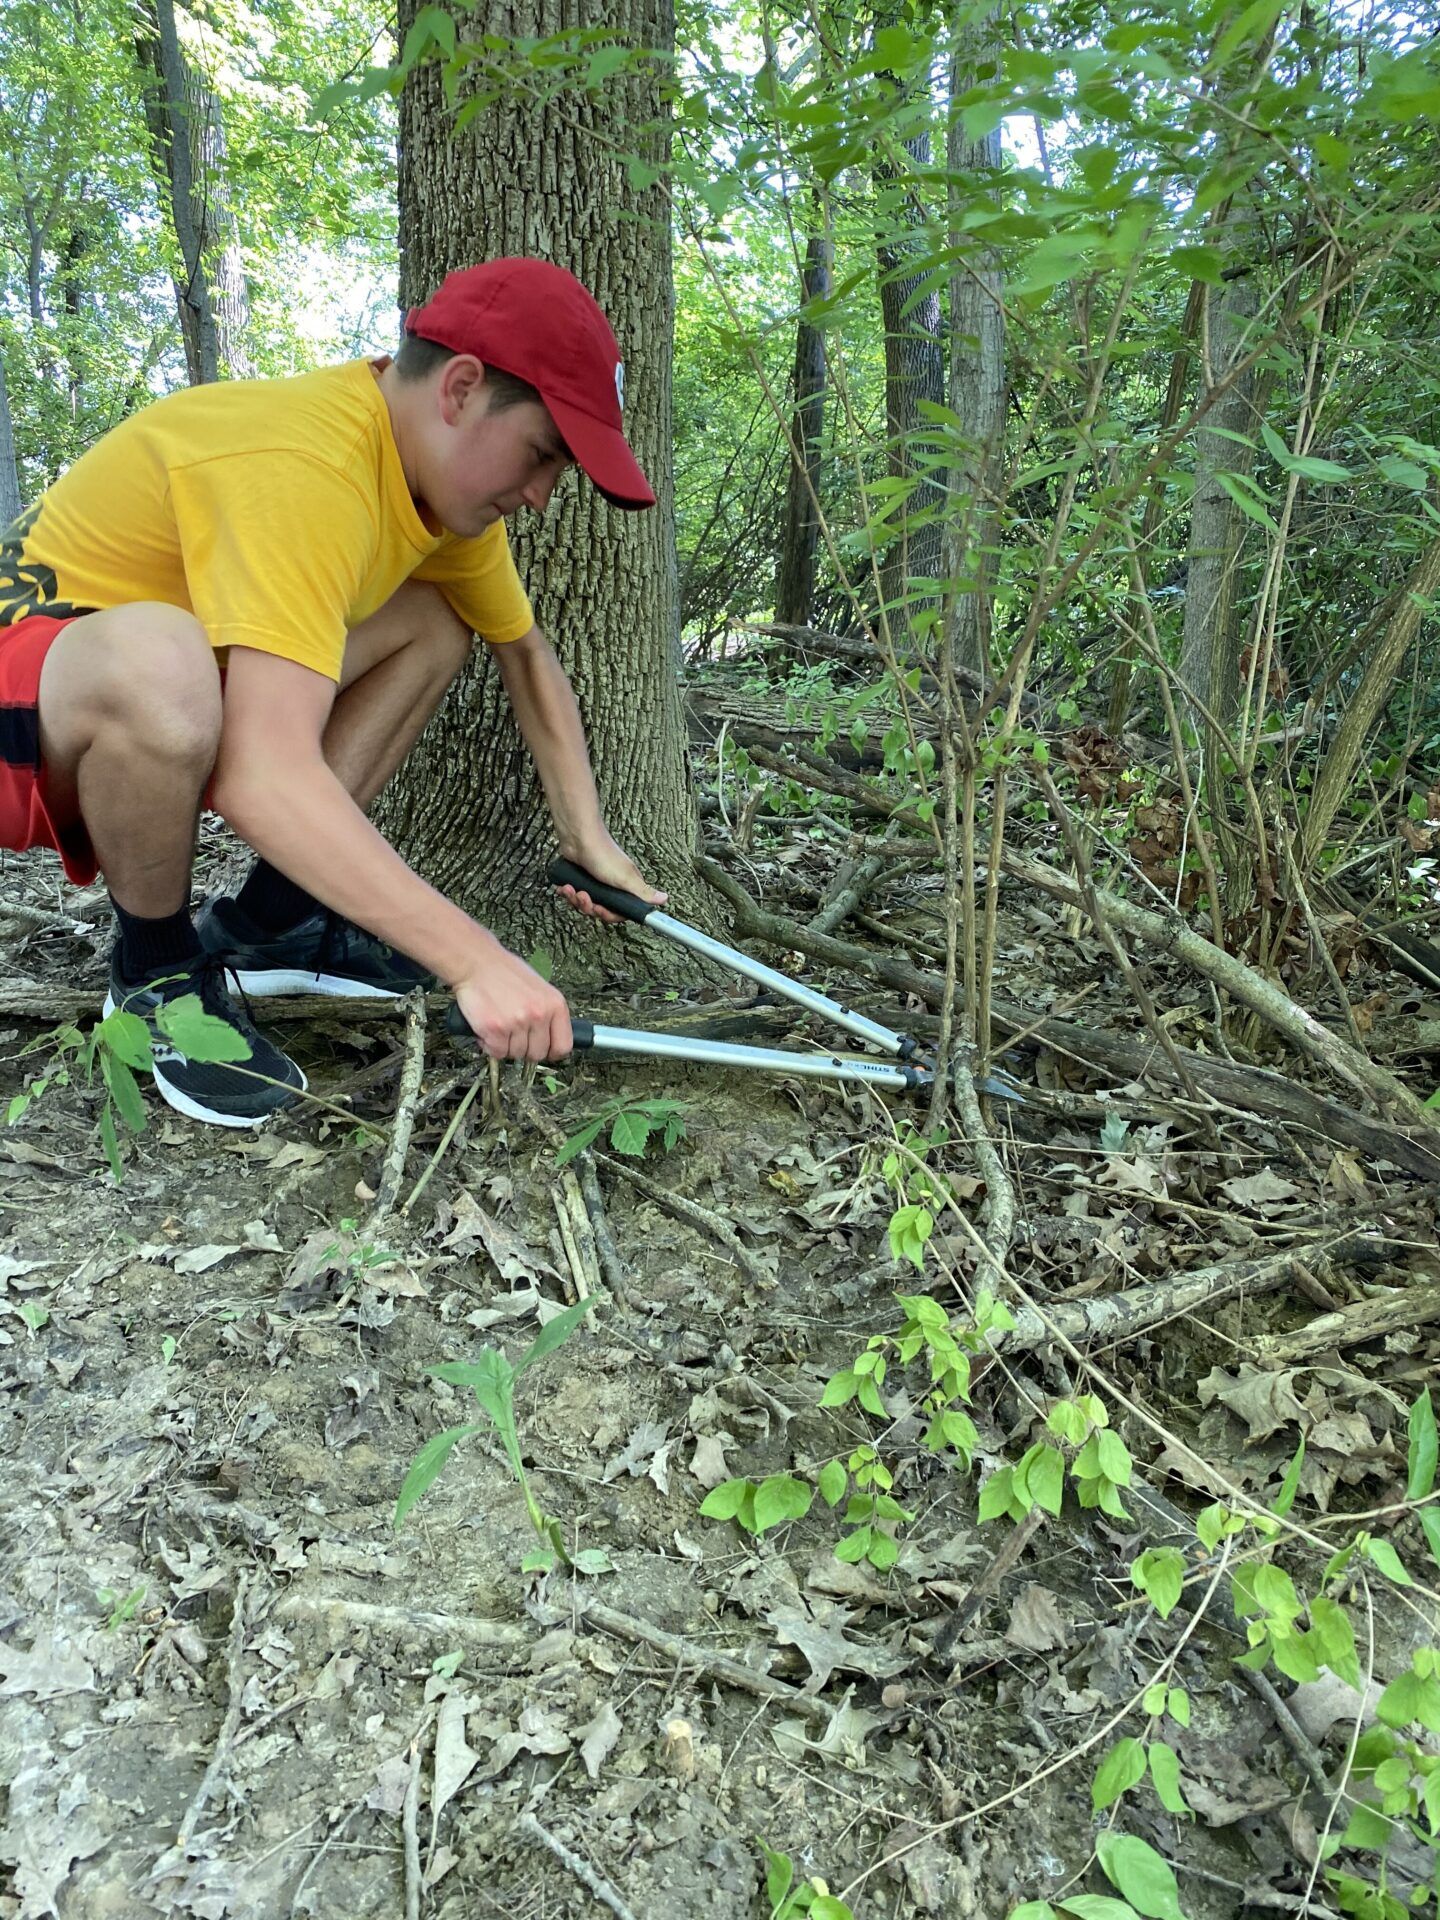 Ohio River Foundation Receives $25K Grant for Region-wide Invasive Species Removal